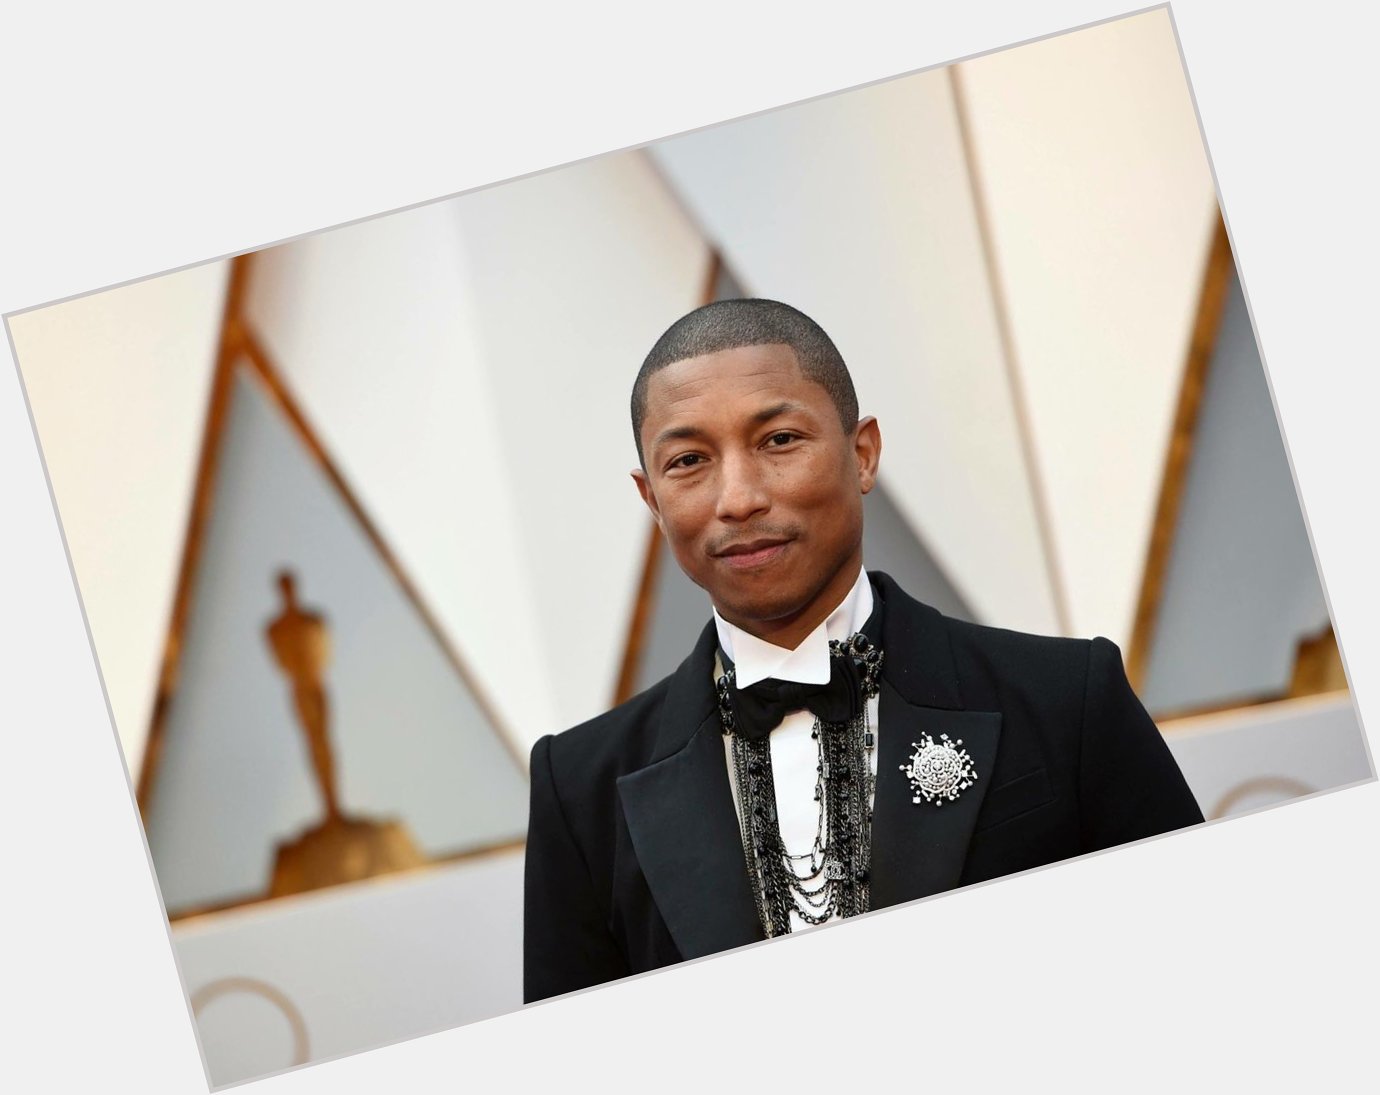 Happy Birthday to Grammy-winning producer, songwriter, and artist Pharrell Williams. He turns 44 today. 